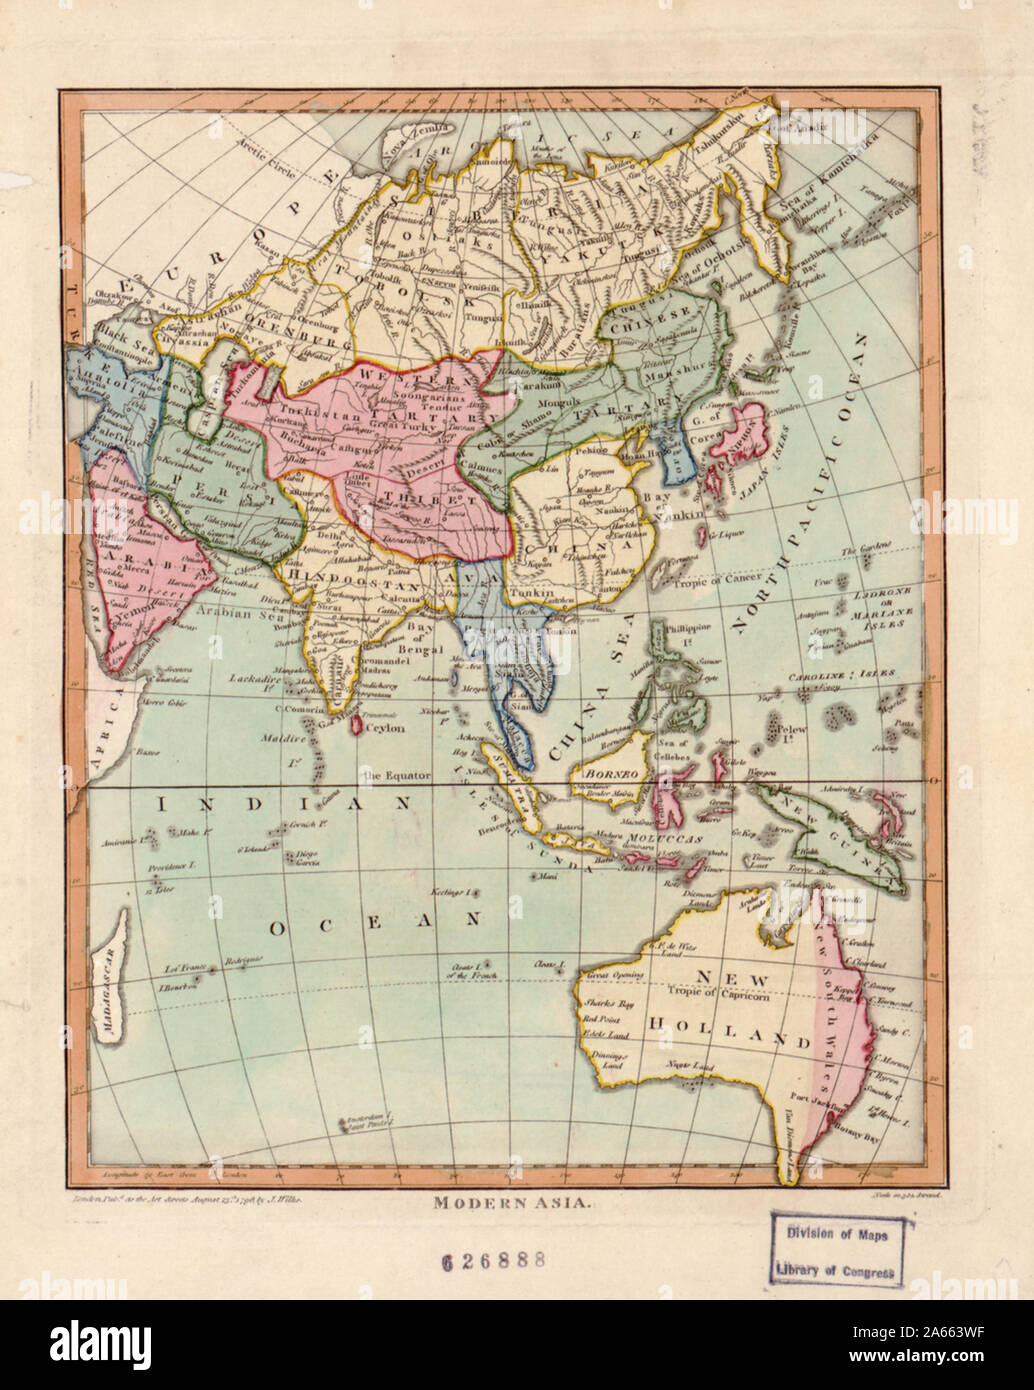 John Wilkes was a London publisher best known for his Encyclopaedia Londinensis; or, universal dictionary of arts, sciences, and literature (1801-28). Wilkes frequently worked with Samuel John Neele, the engraver of this hand-colored map of “modern Asia.” The map reflects late 18th-century European geographic conceptions and terminology. India is referred to as “Hindoostan,” while much of the interior is shown as comprised of “Western Tartary” and “Chinese Tartary.” “Tartary” was a designation applied by Europeans to those parts of Asia inhabited by nomadic Turkic and Mongol peoples. This map Stock Photo